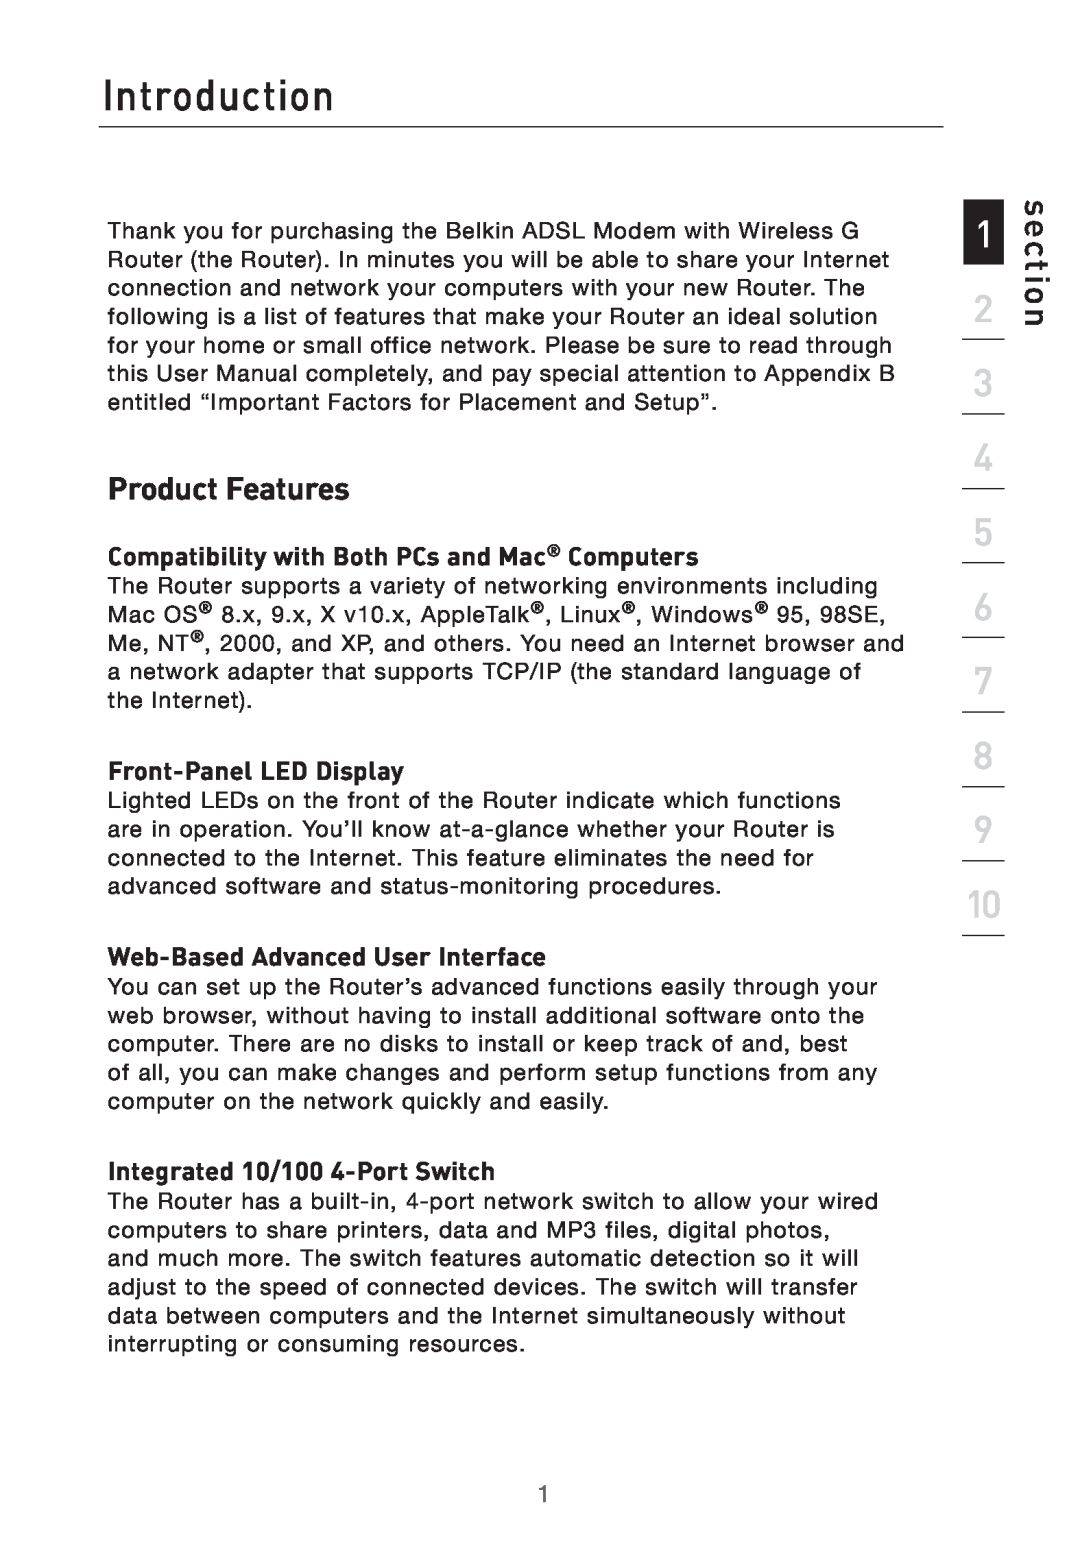 Belkin F5D7632UK4 user manual Introduction, section, Product Features, Compatibility with Both PCs and Mac Computers 